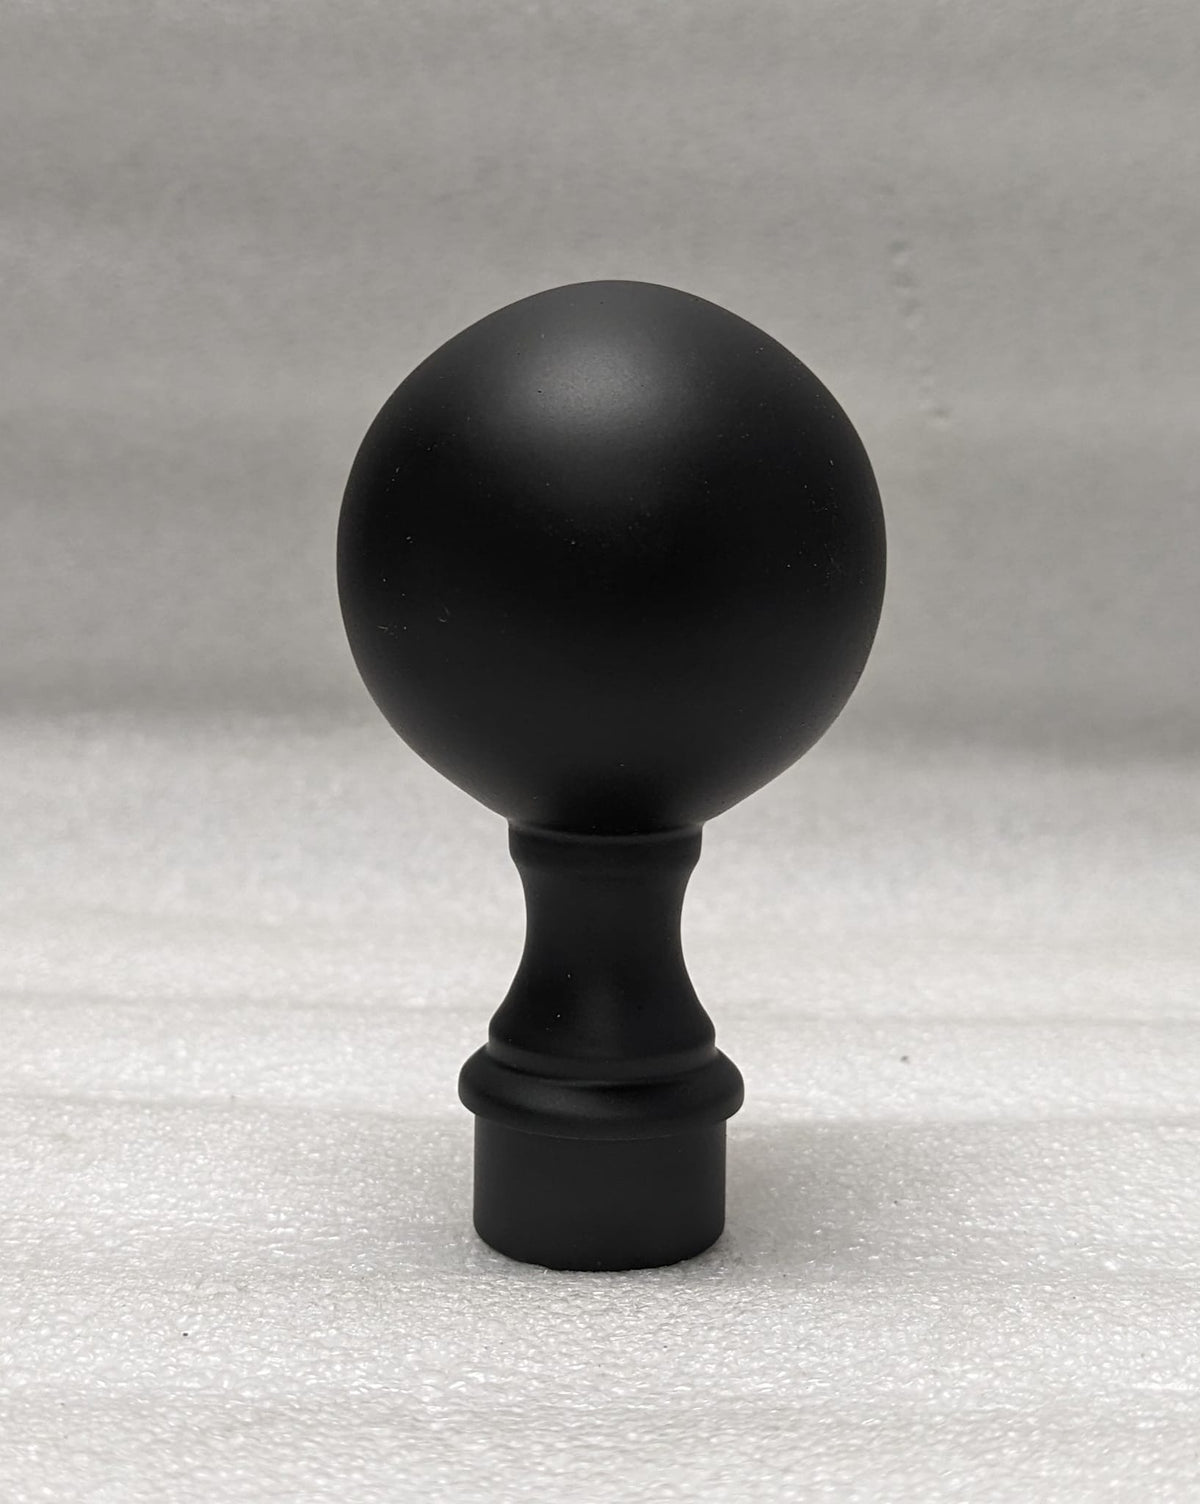 Ball Finial for 1" OD Tubing End Caps and Finials, Components for 1" Od Tubing Matte-Black-Powder-Coated-Finish Trade Diversified